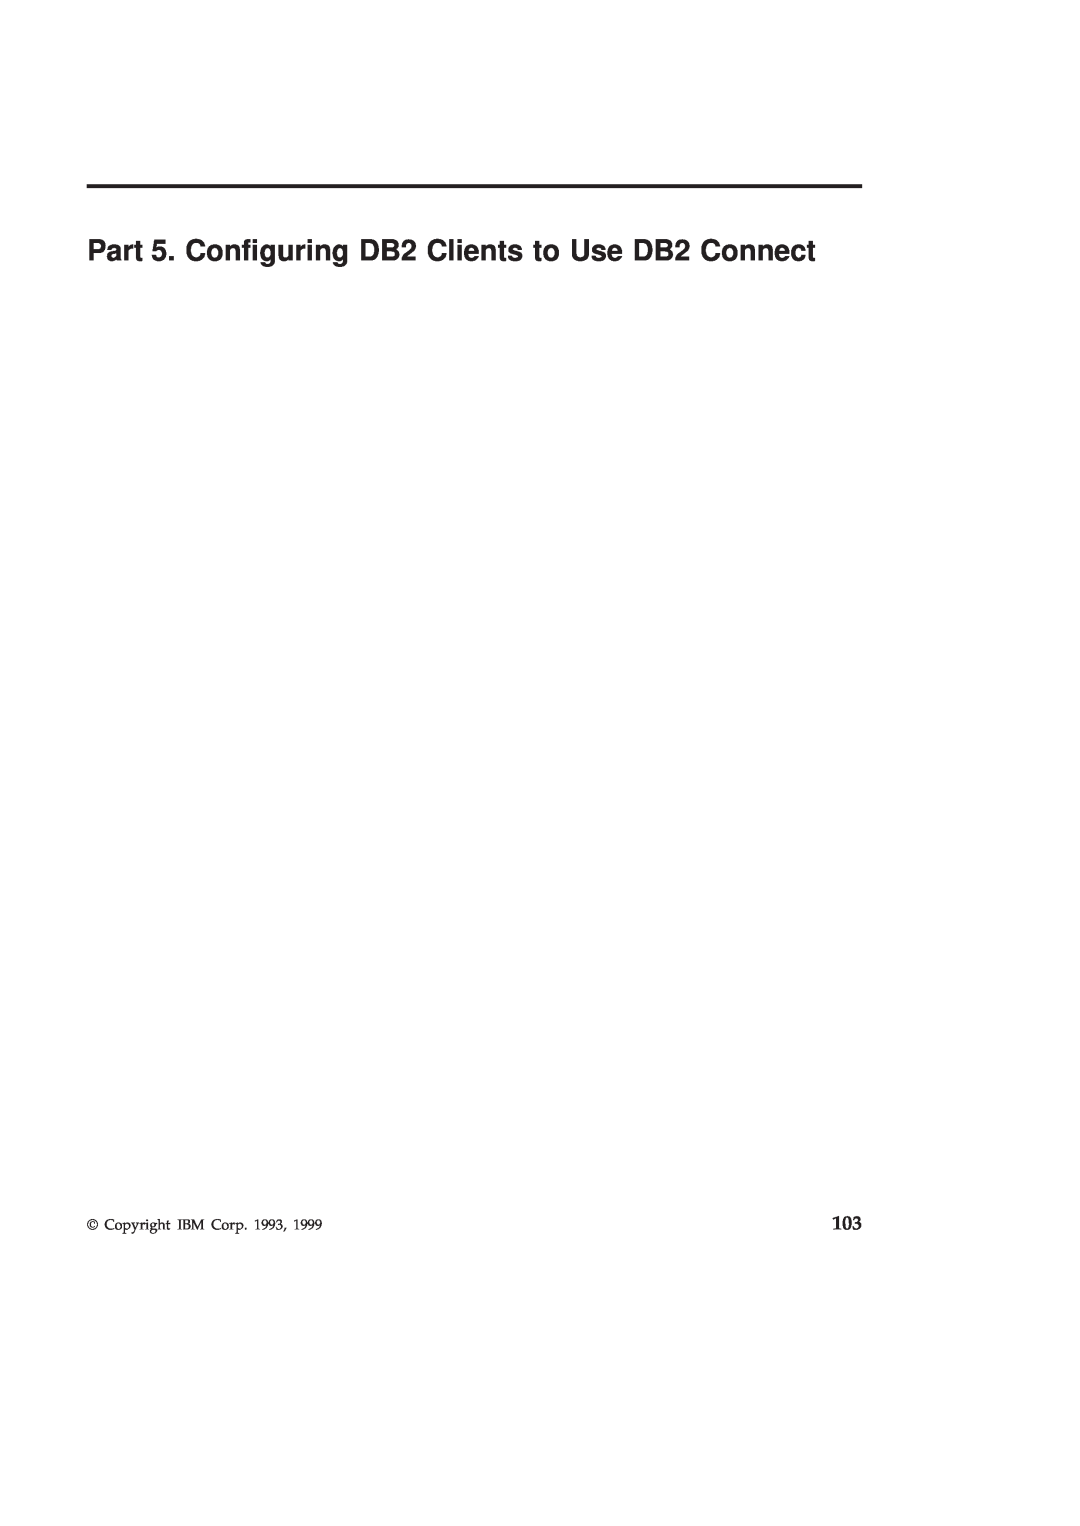 IBM GC09-2830-00 manual Part 5. Conguring DB2 Clients to Use DB2 Connect, Copyright IBM Corp. 1993 